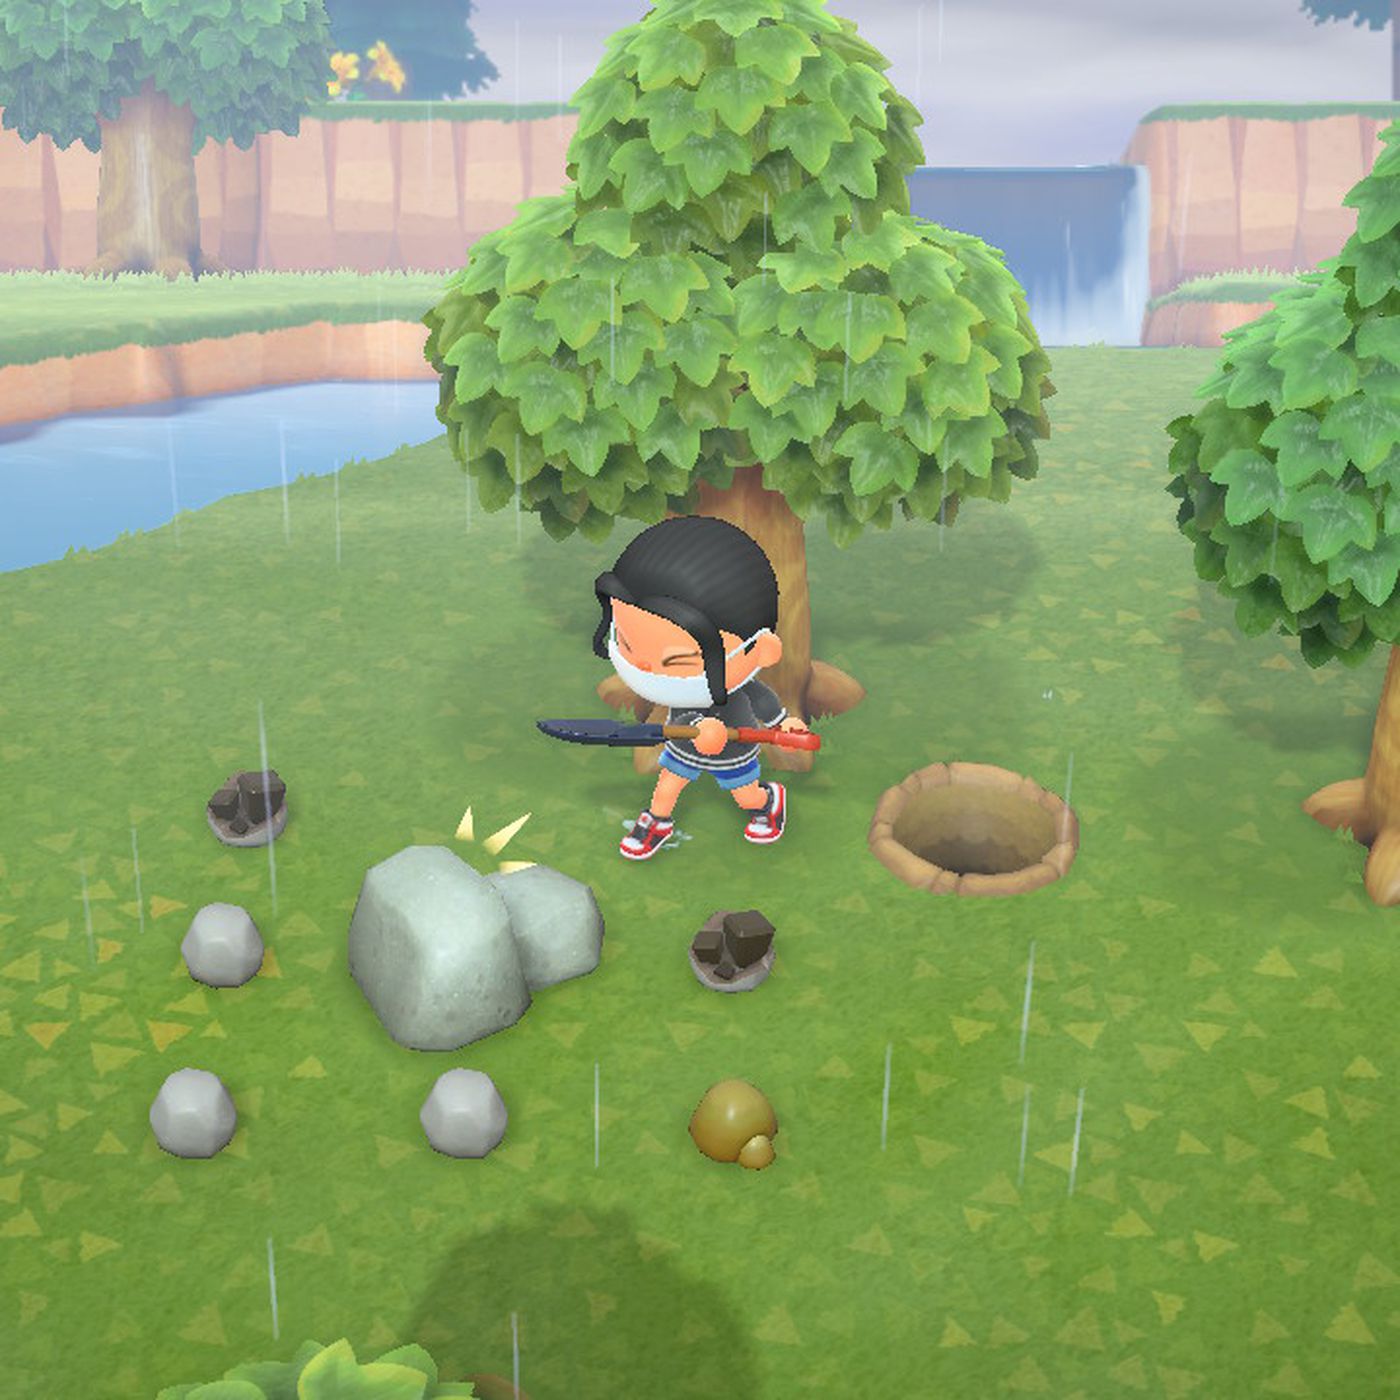 Iron Nuggets in Animal Crossing, explained - Polygon